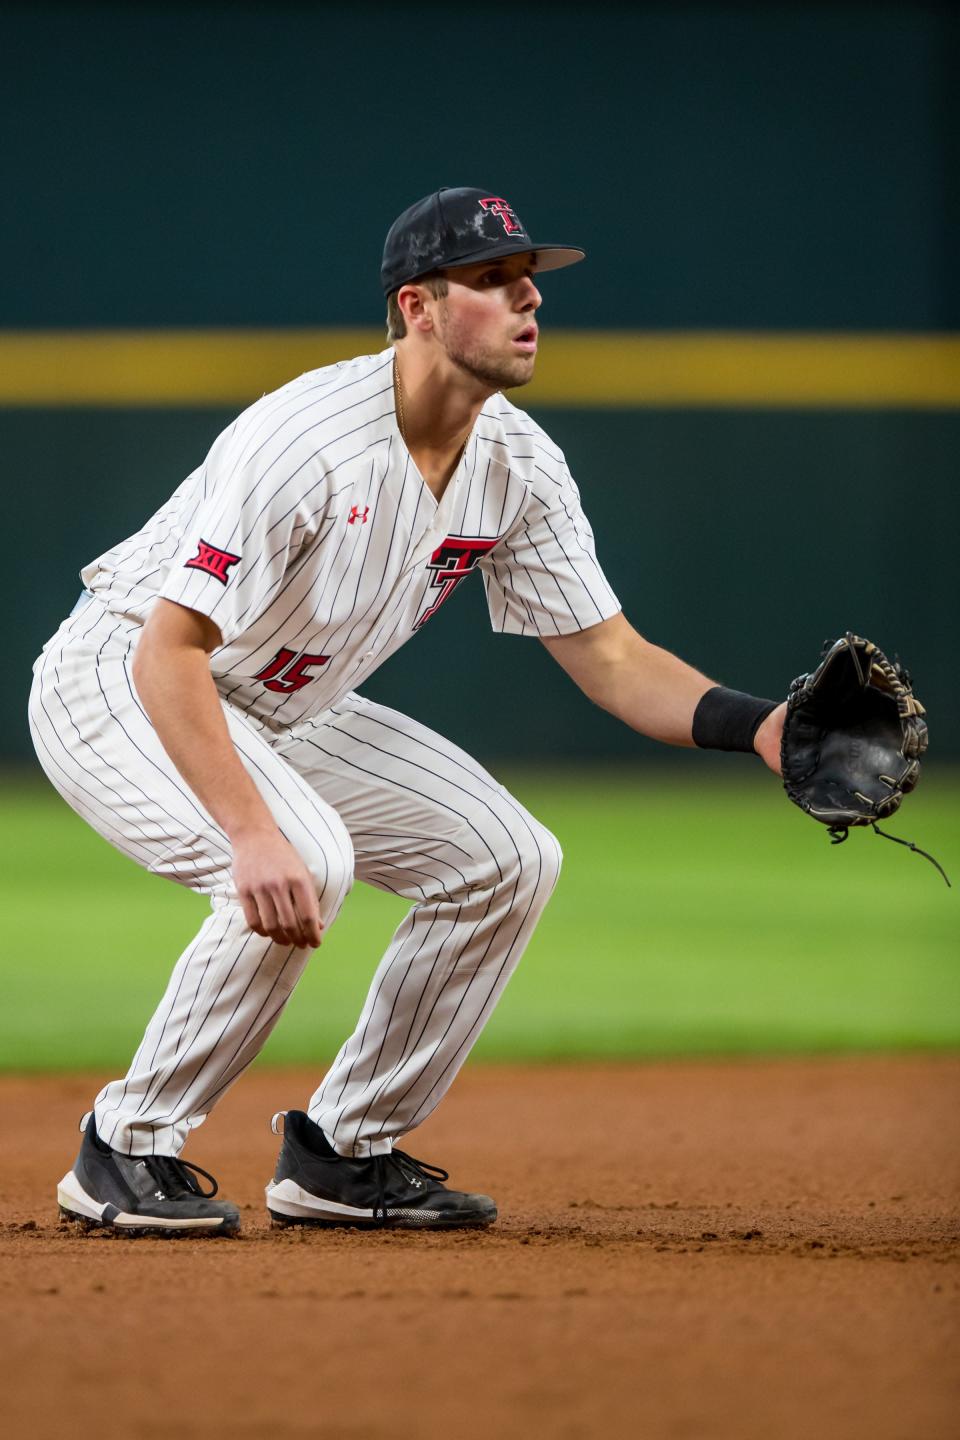 Texas Tech&#39;s Parker Kelly is among the Big 12 leaders with six home runs and 27 runs batted in this season, both already career bests for the senior third baseman.